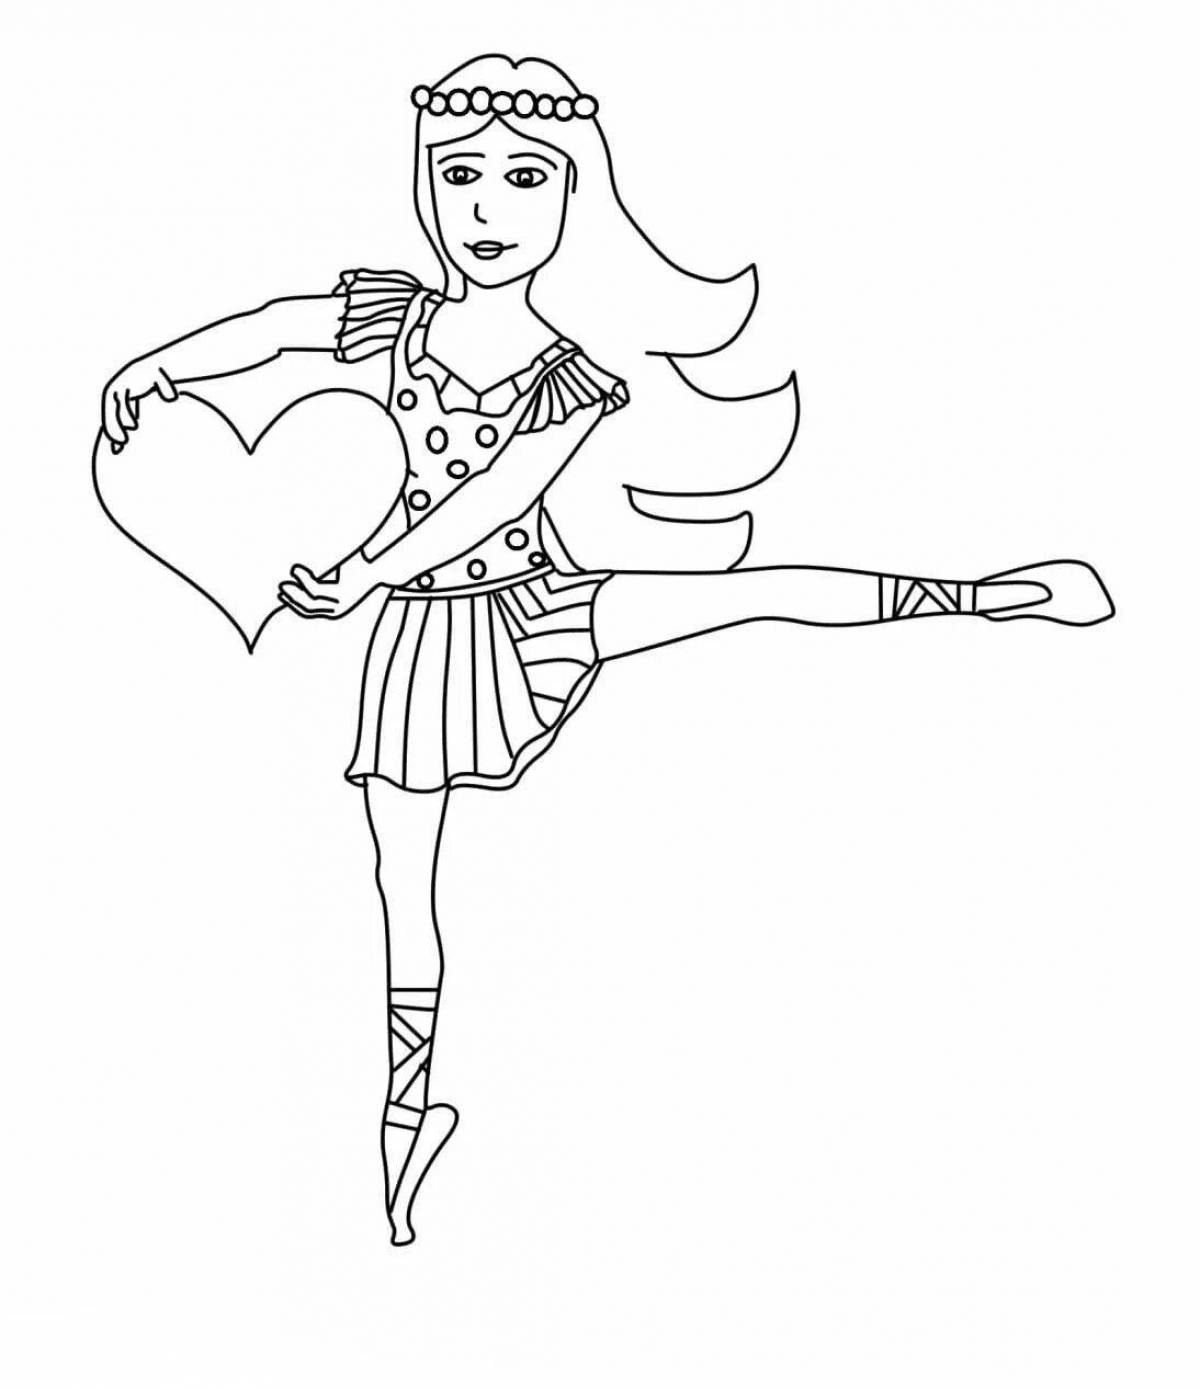 Blessed ballerina coloring page